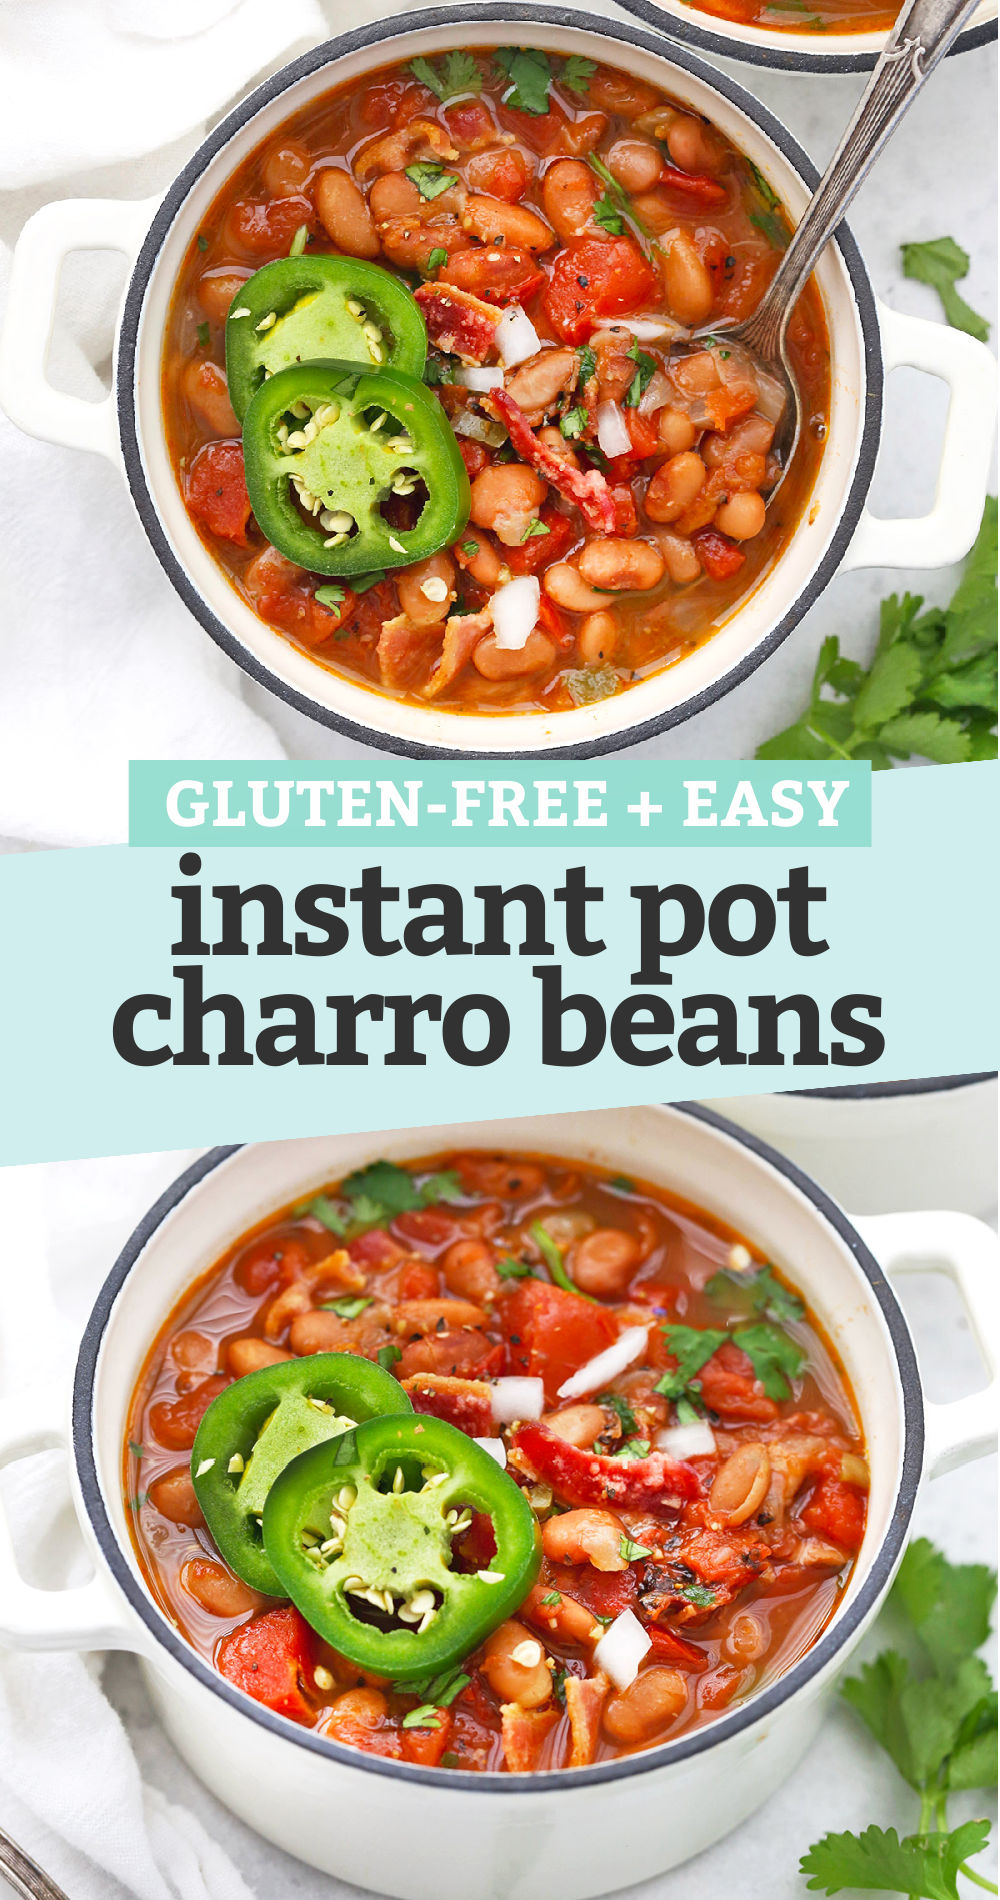 Collage of images of bowls of Instant Pot Charro Beans with text overlay that reads "Gluten-Free + Easy Instant Pot Charro Beans"